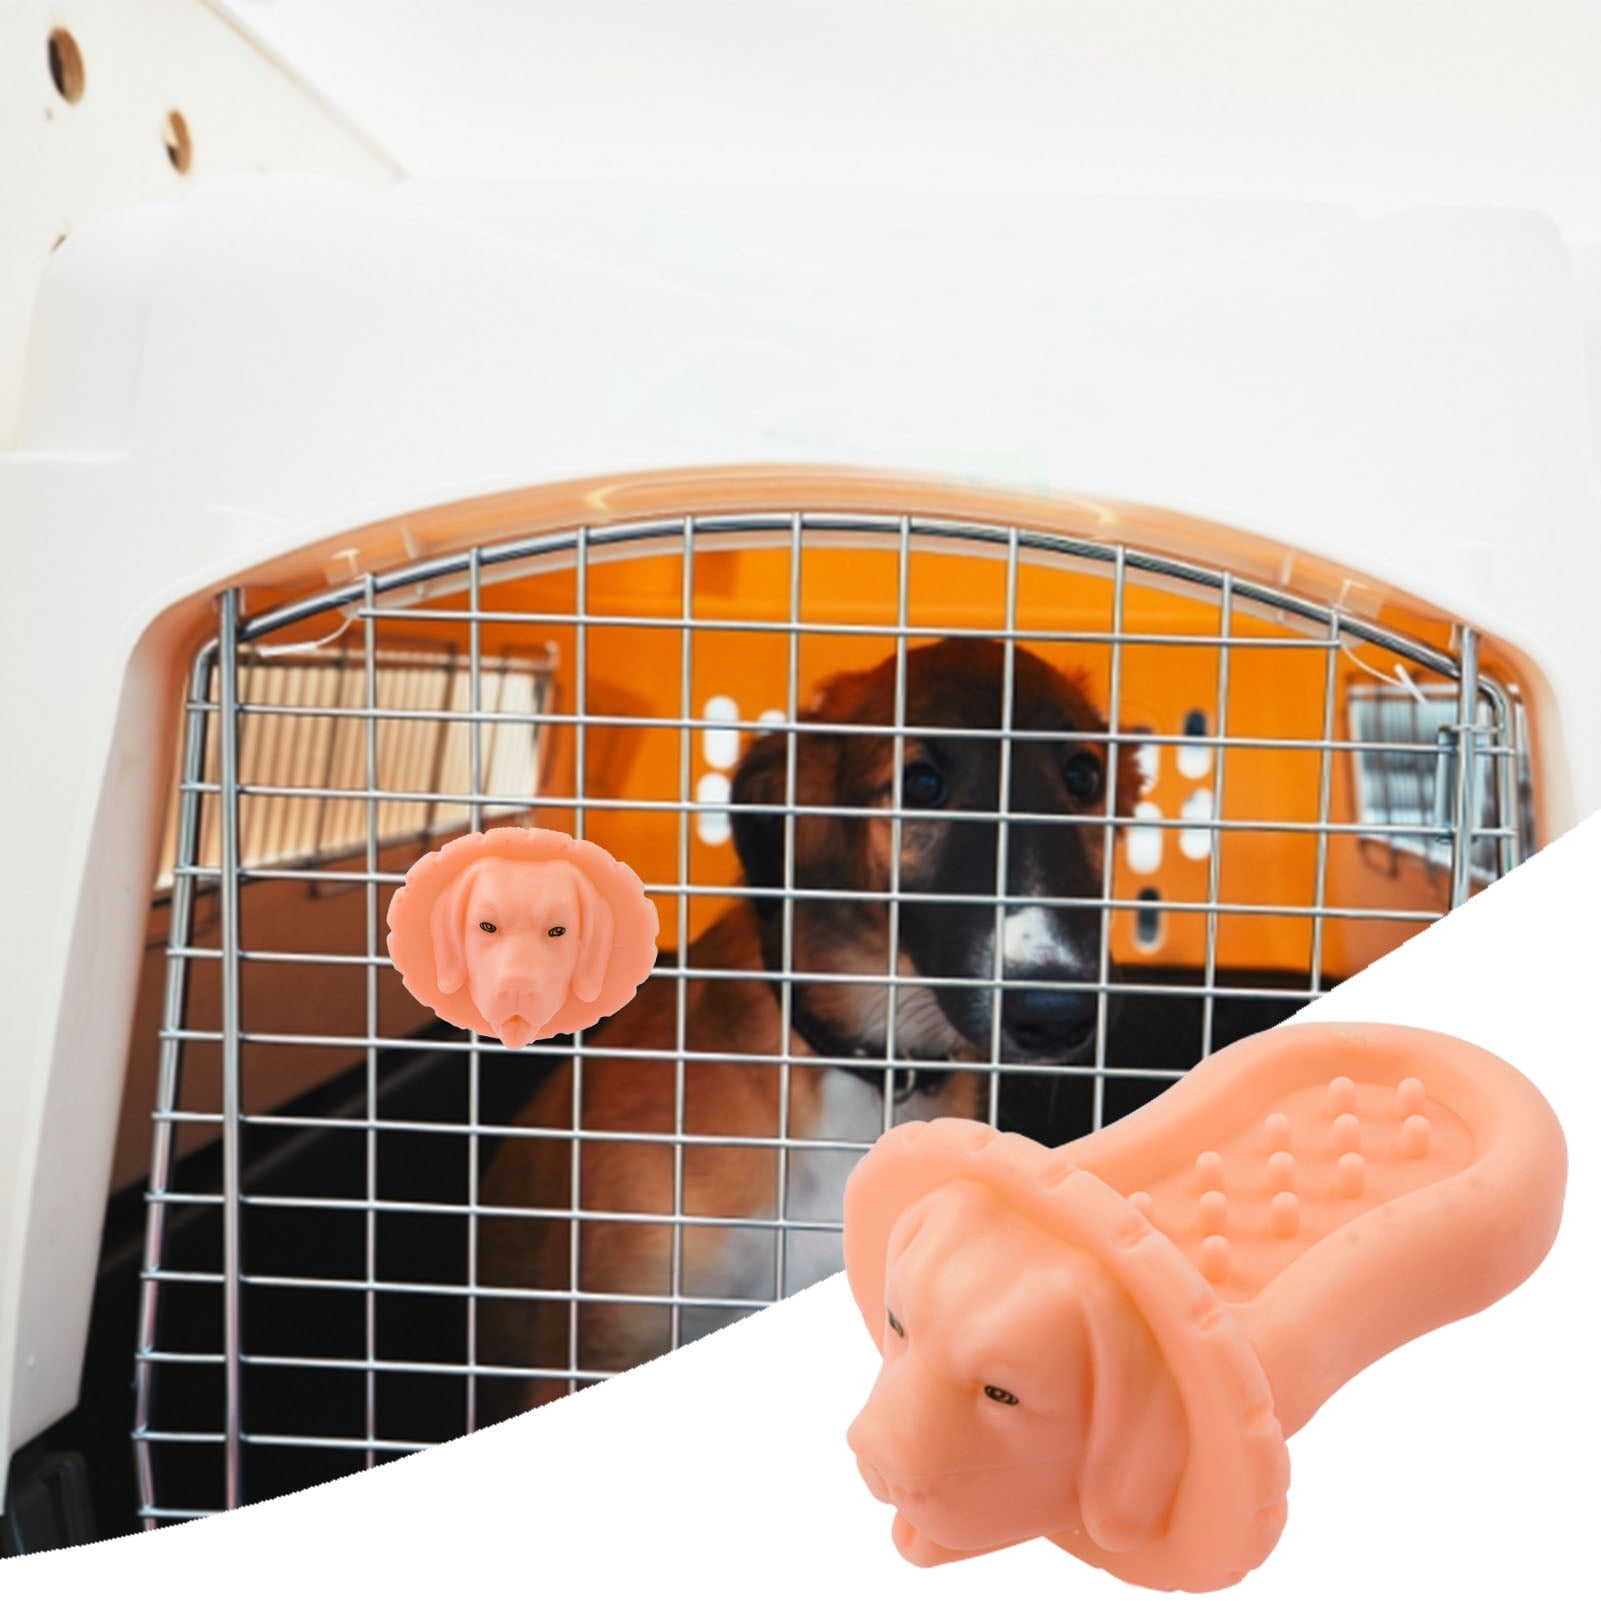 Dog Crate Training Tool Peanut Butter Treat Dispenser Licking Toy